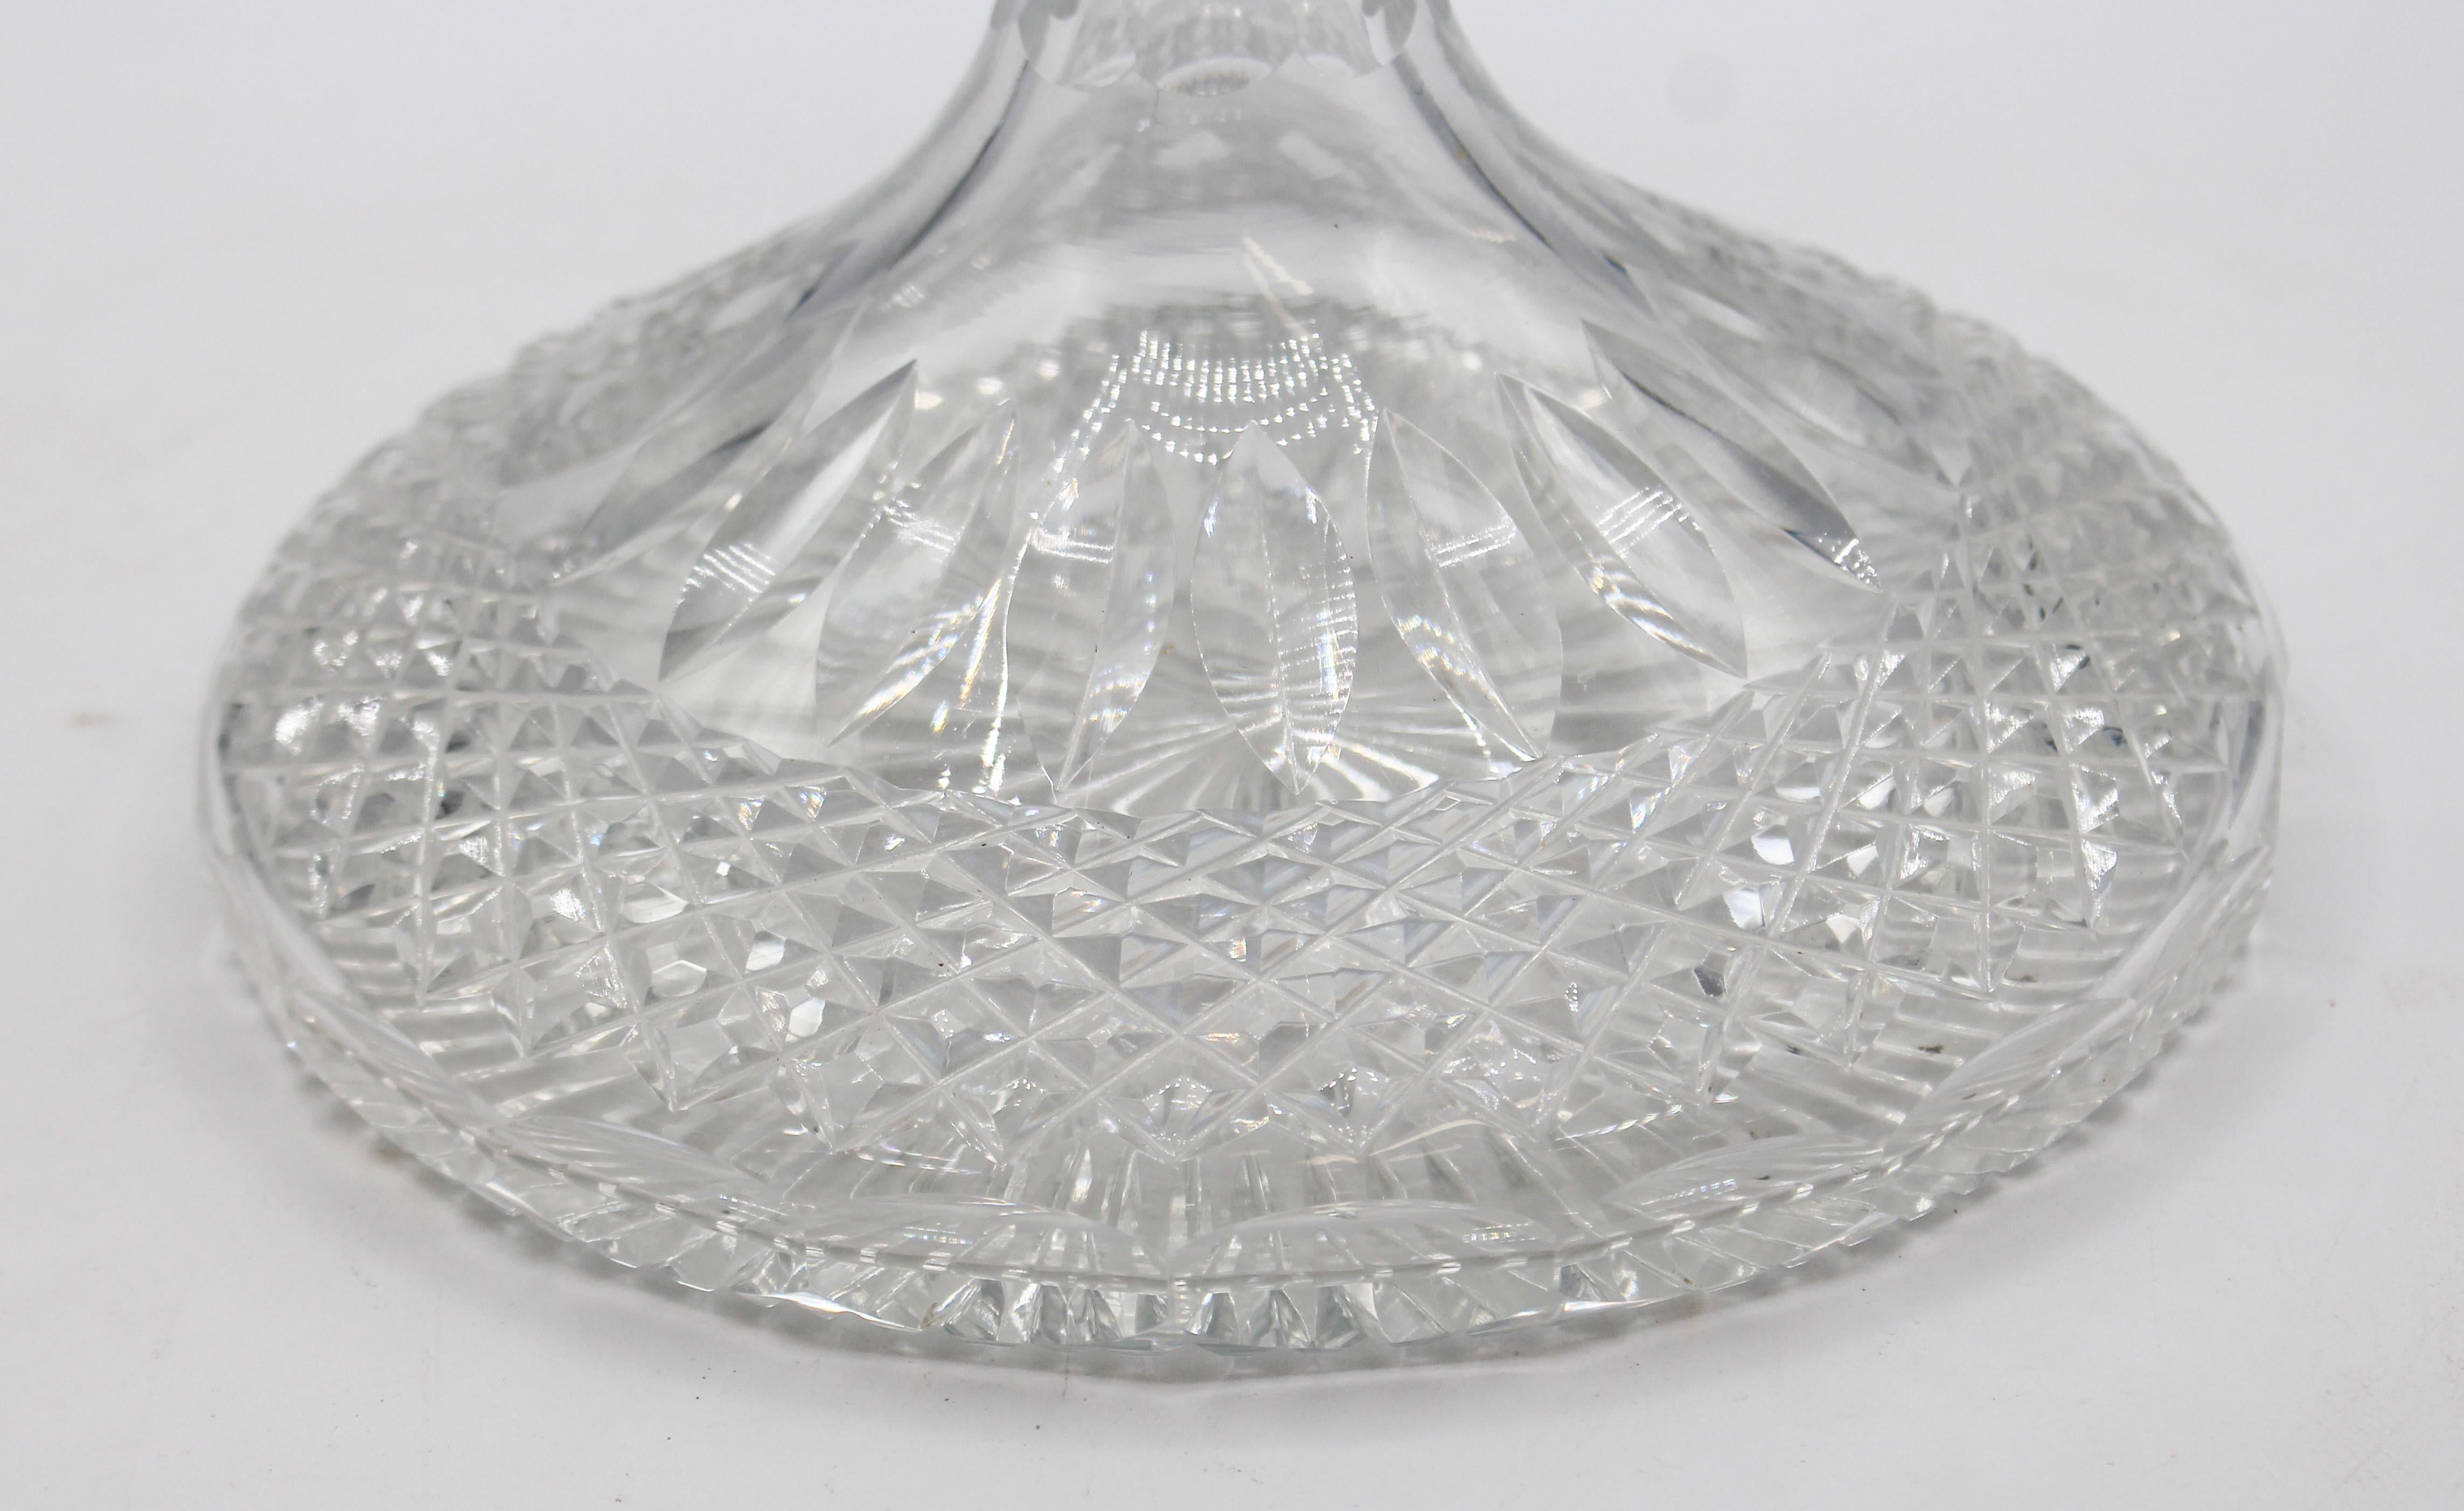 Irish Mid-Late 20th Century Crystal Ship's Decanter For Sale